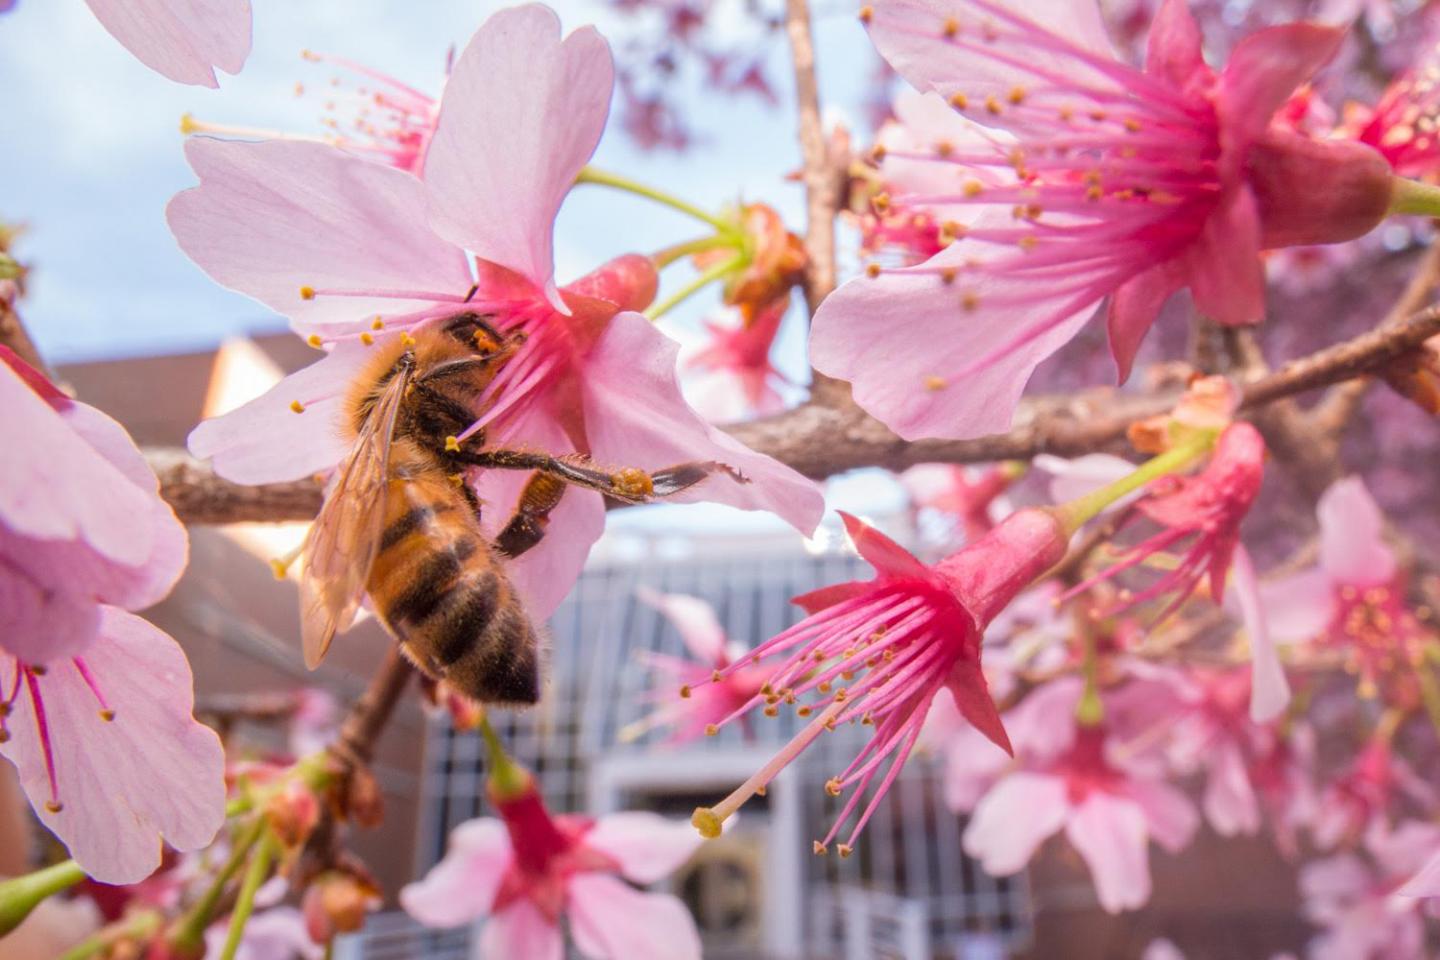 City Bees Don't Indulge in Junk Food